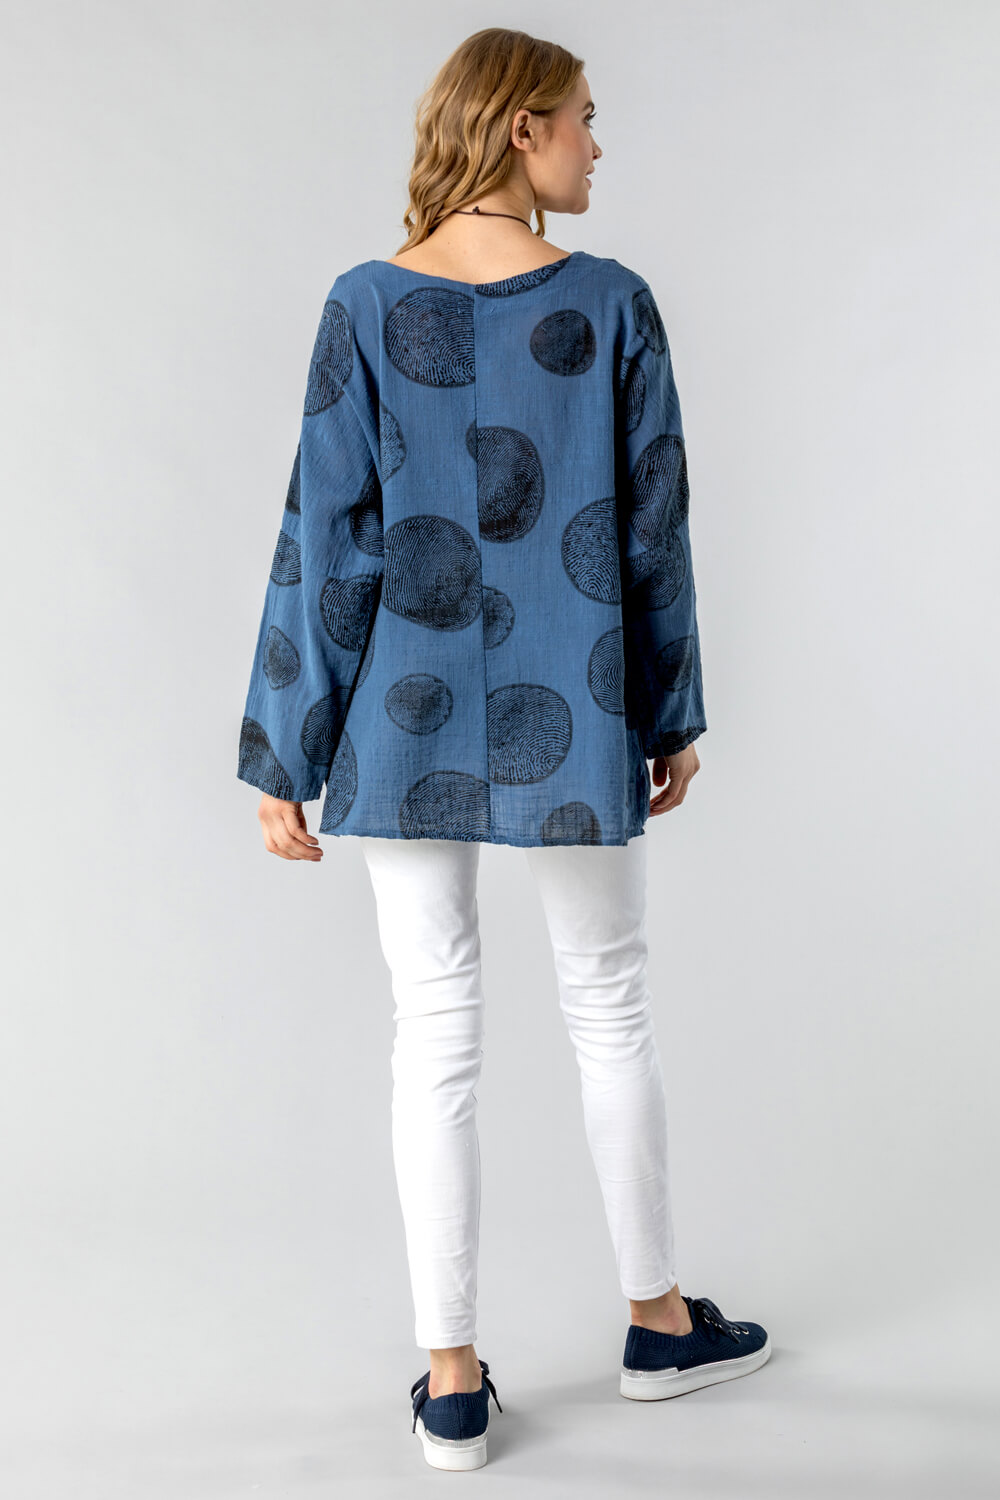 Blue Spot Print Top with Necklace, Image 2 of 4